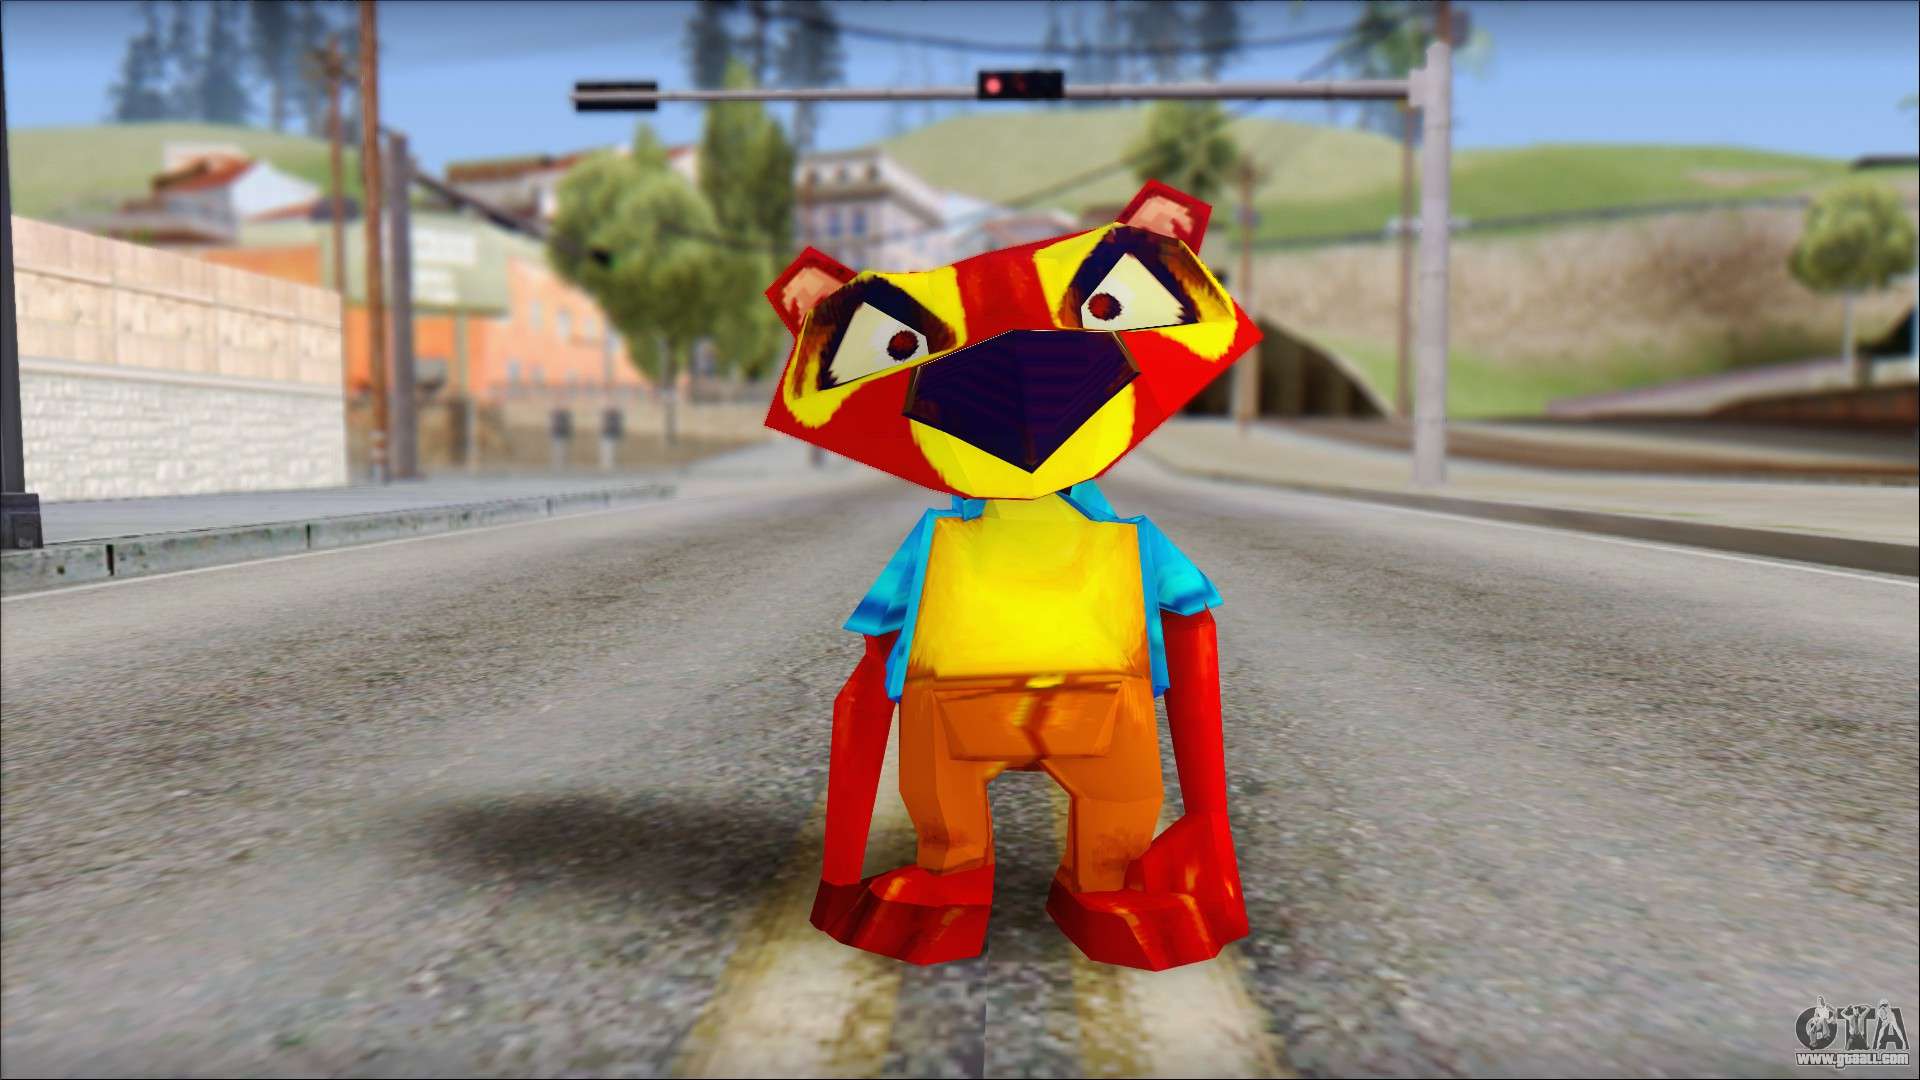 Chang the Firefox from Fur Fighters Playable for GTA San Andreas